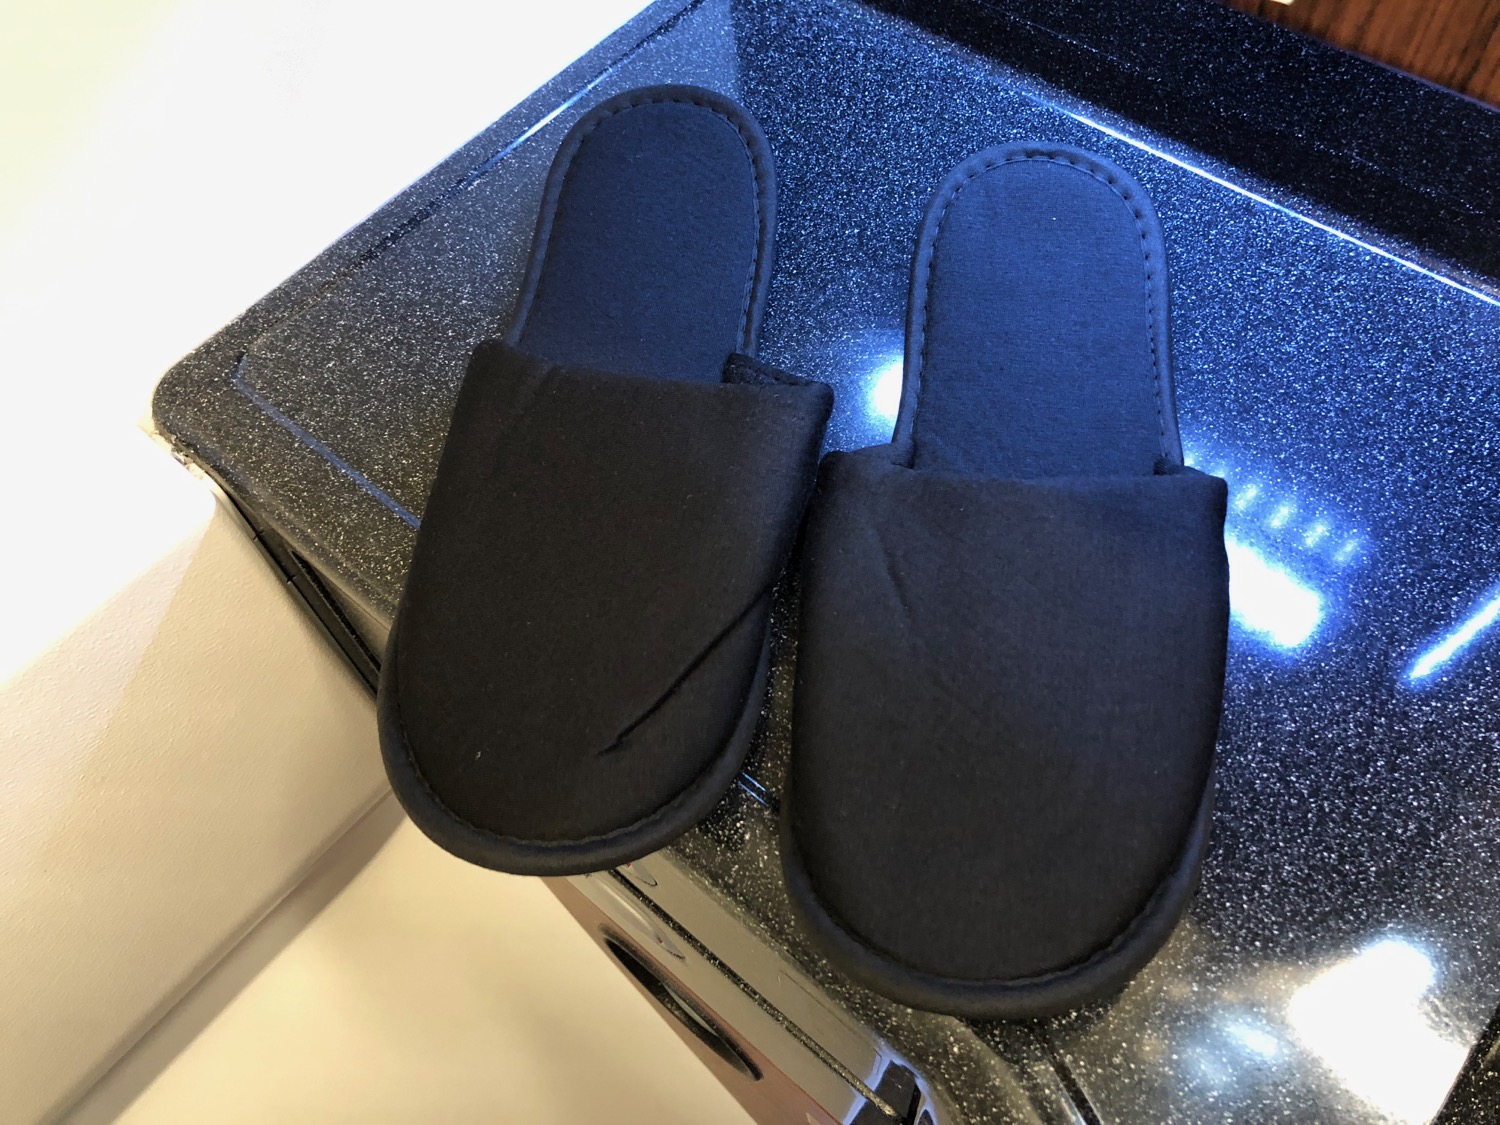 a pair of black slippers on a black surface